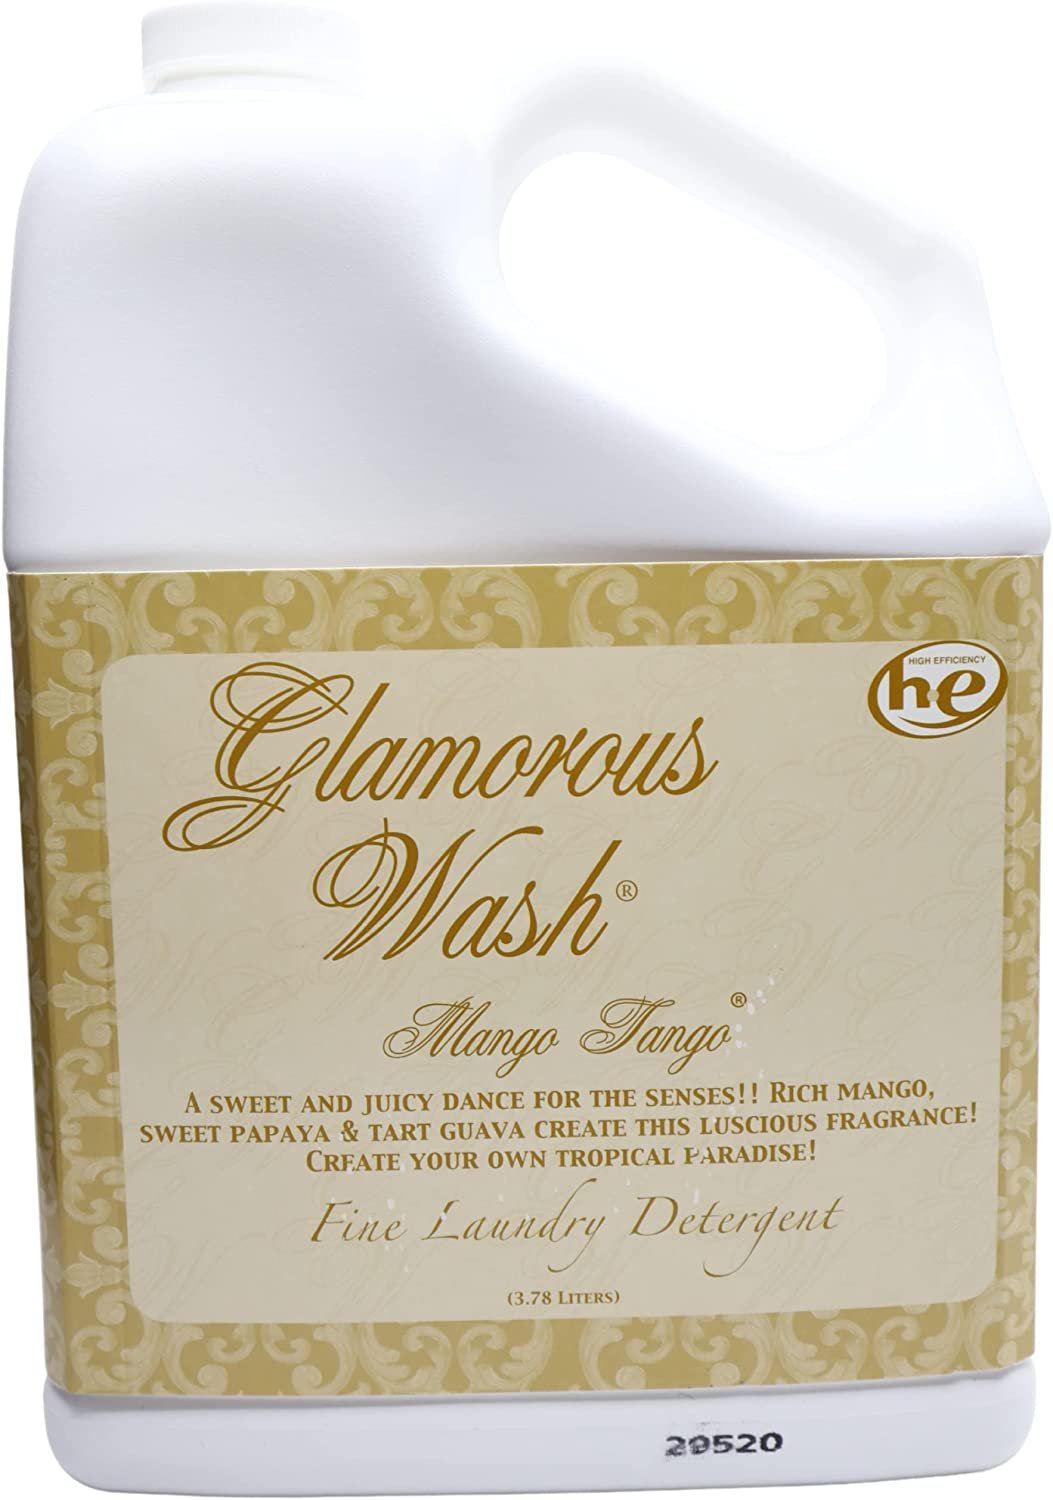 Tyler Candle Company Glamorous Wash Mango Tango Fine Laundry Liquid Detergent - Liquid Laundry Detergent Designed for Clothing - Hand and Machine Washable - 3.78L (1Gal) Container